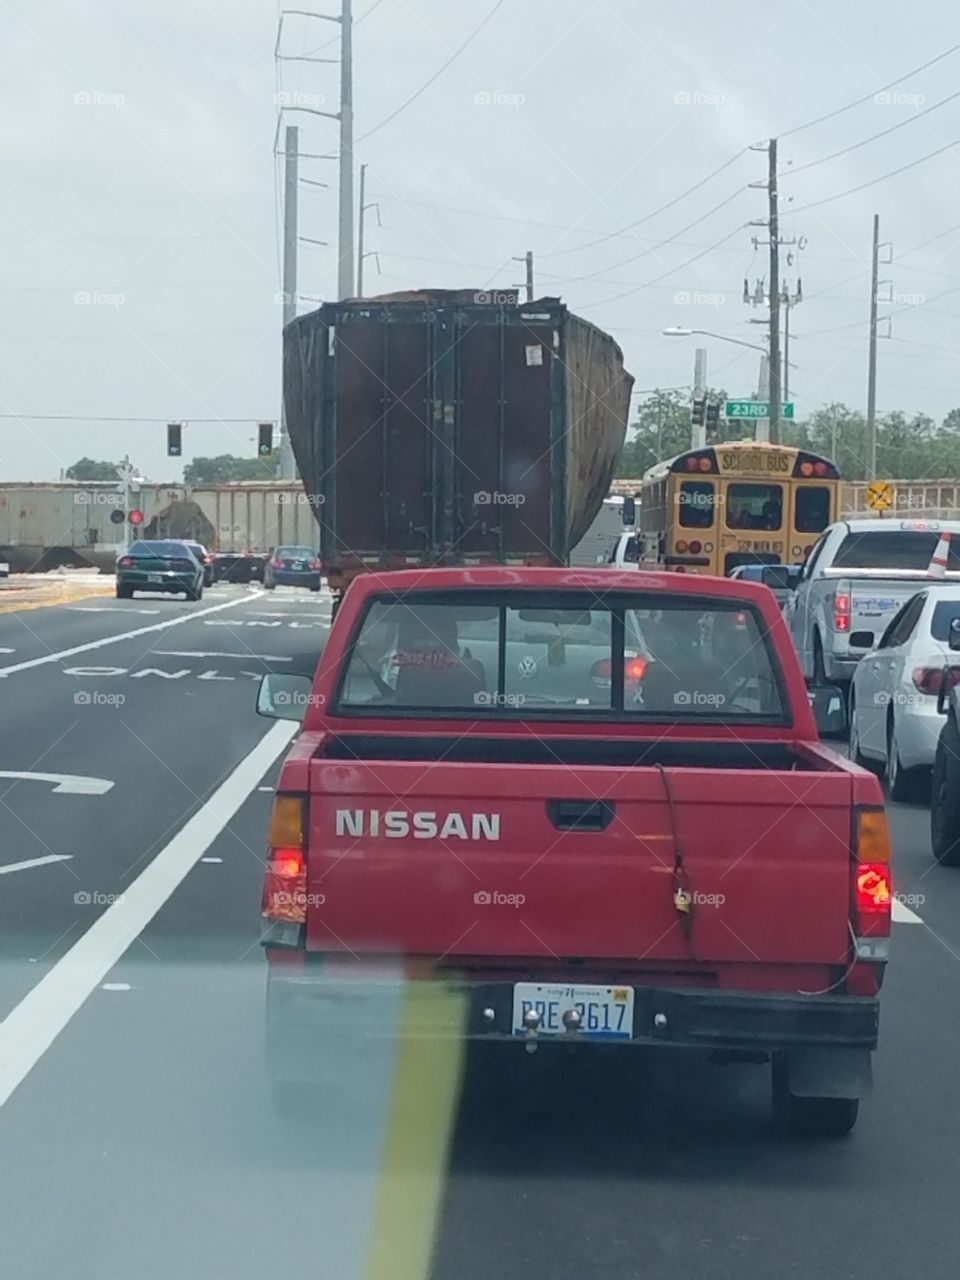 what's up with that truck?!